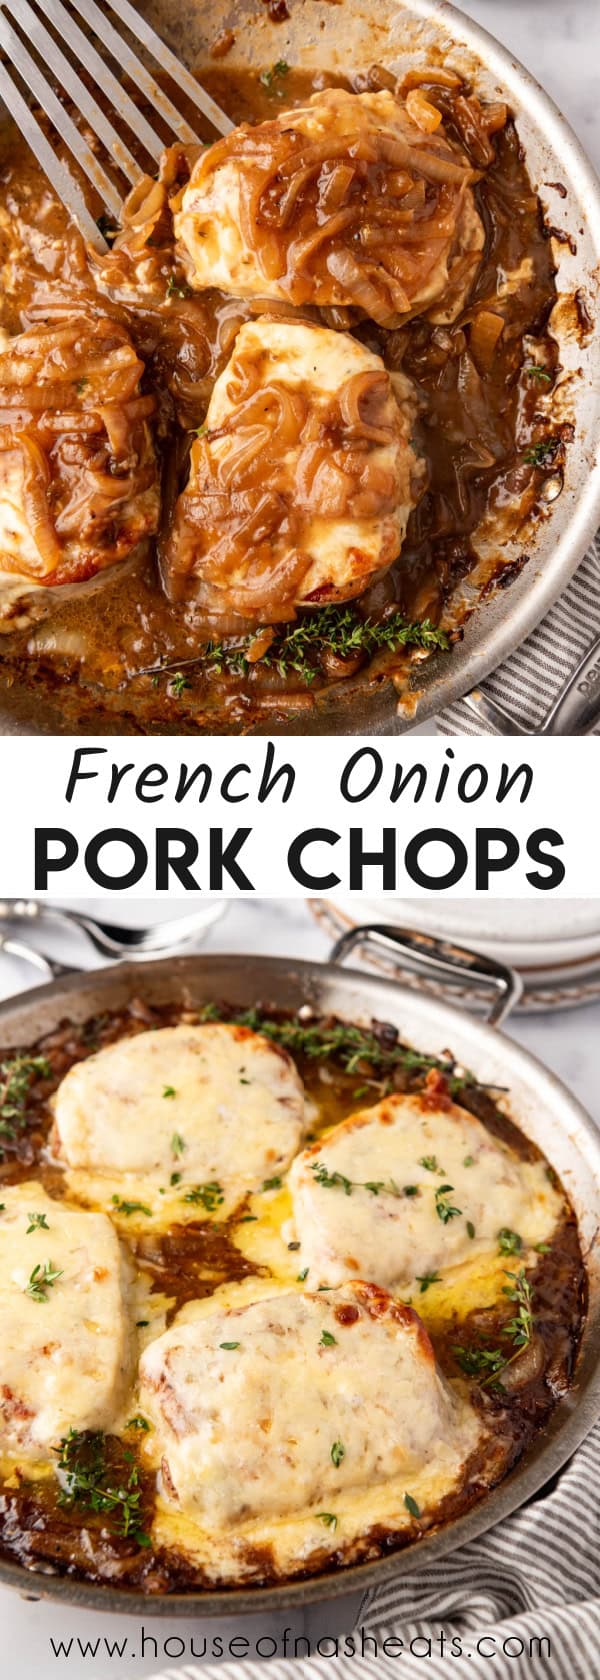 A collage of images of french onion pork chops with text overlay.